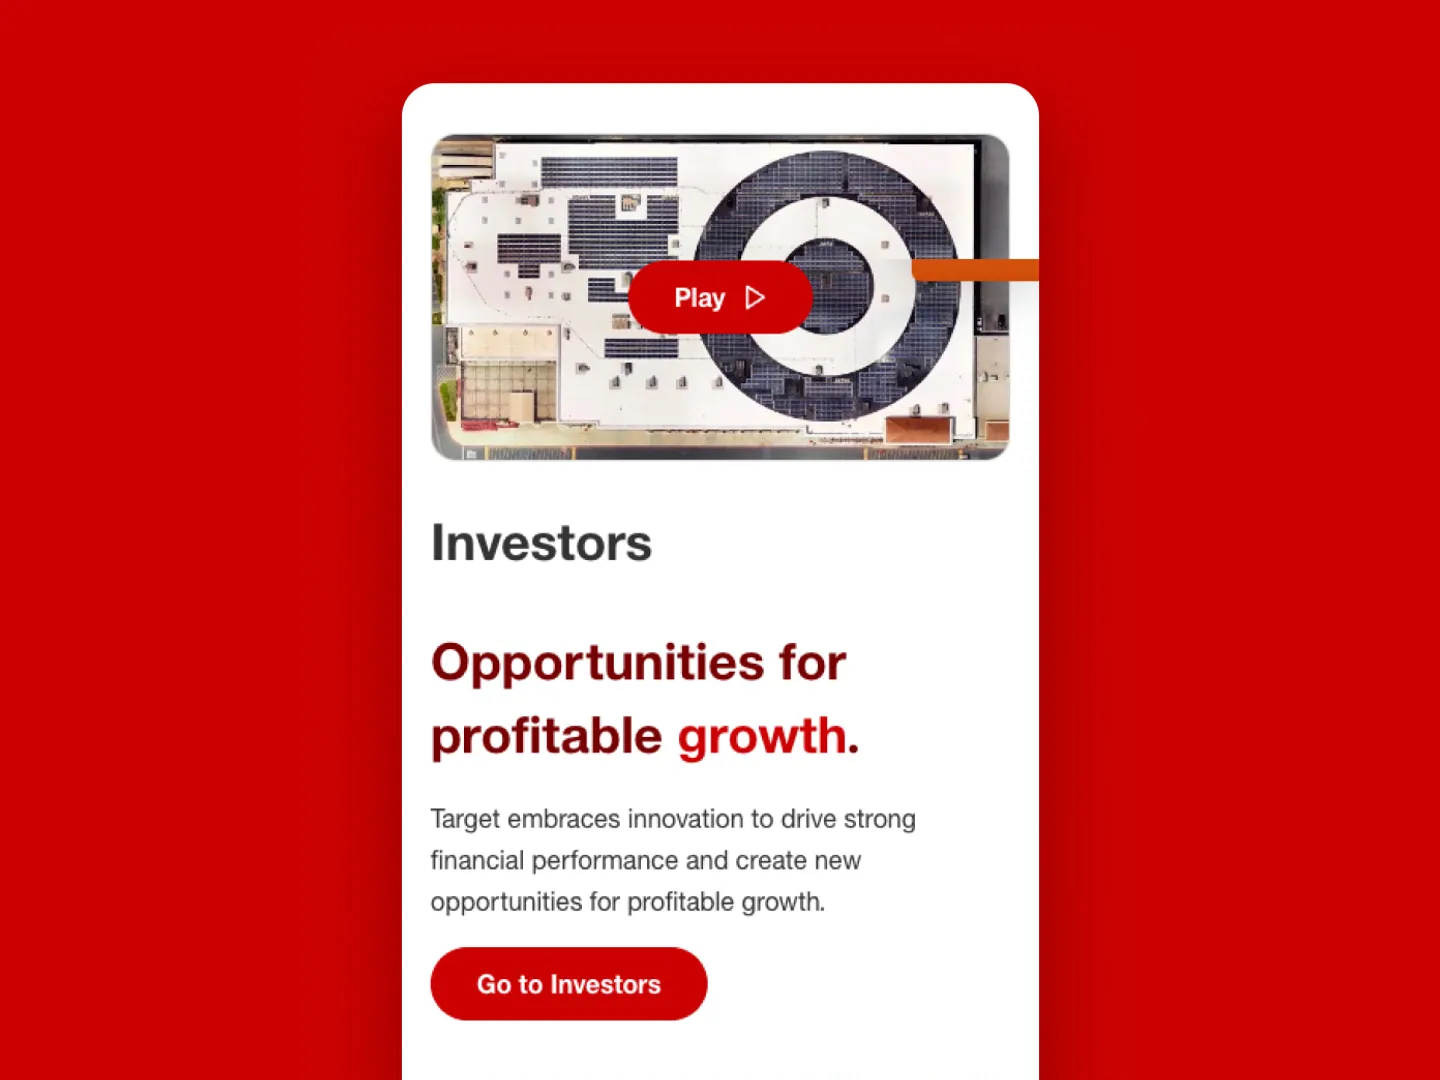 Mobile web page design of the Investors page